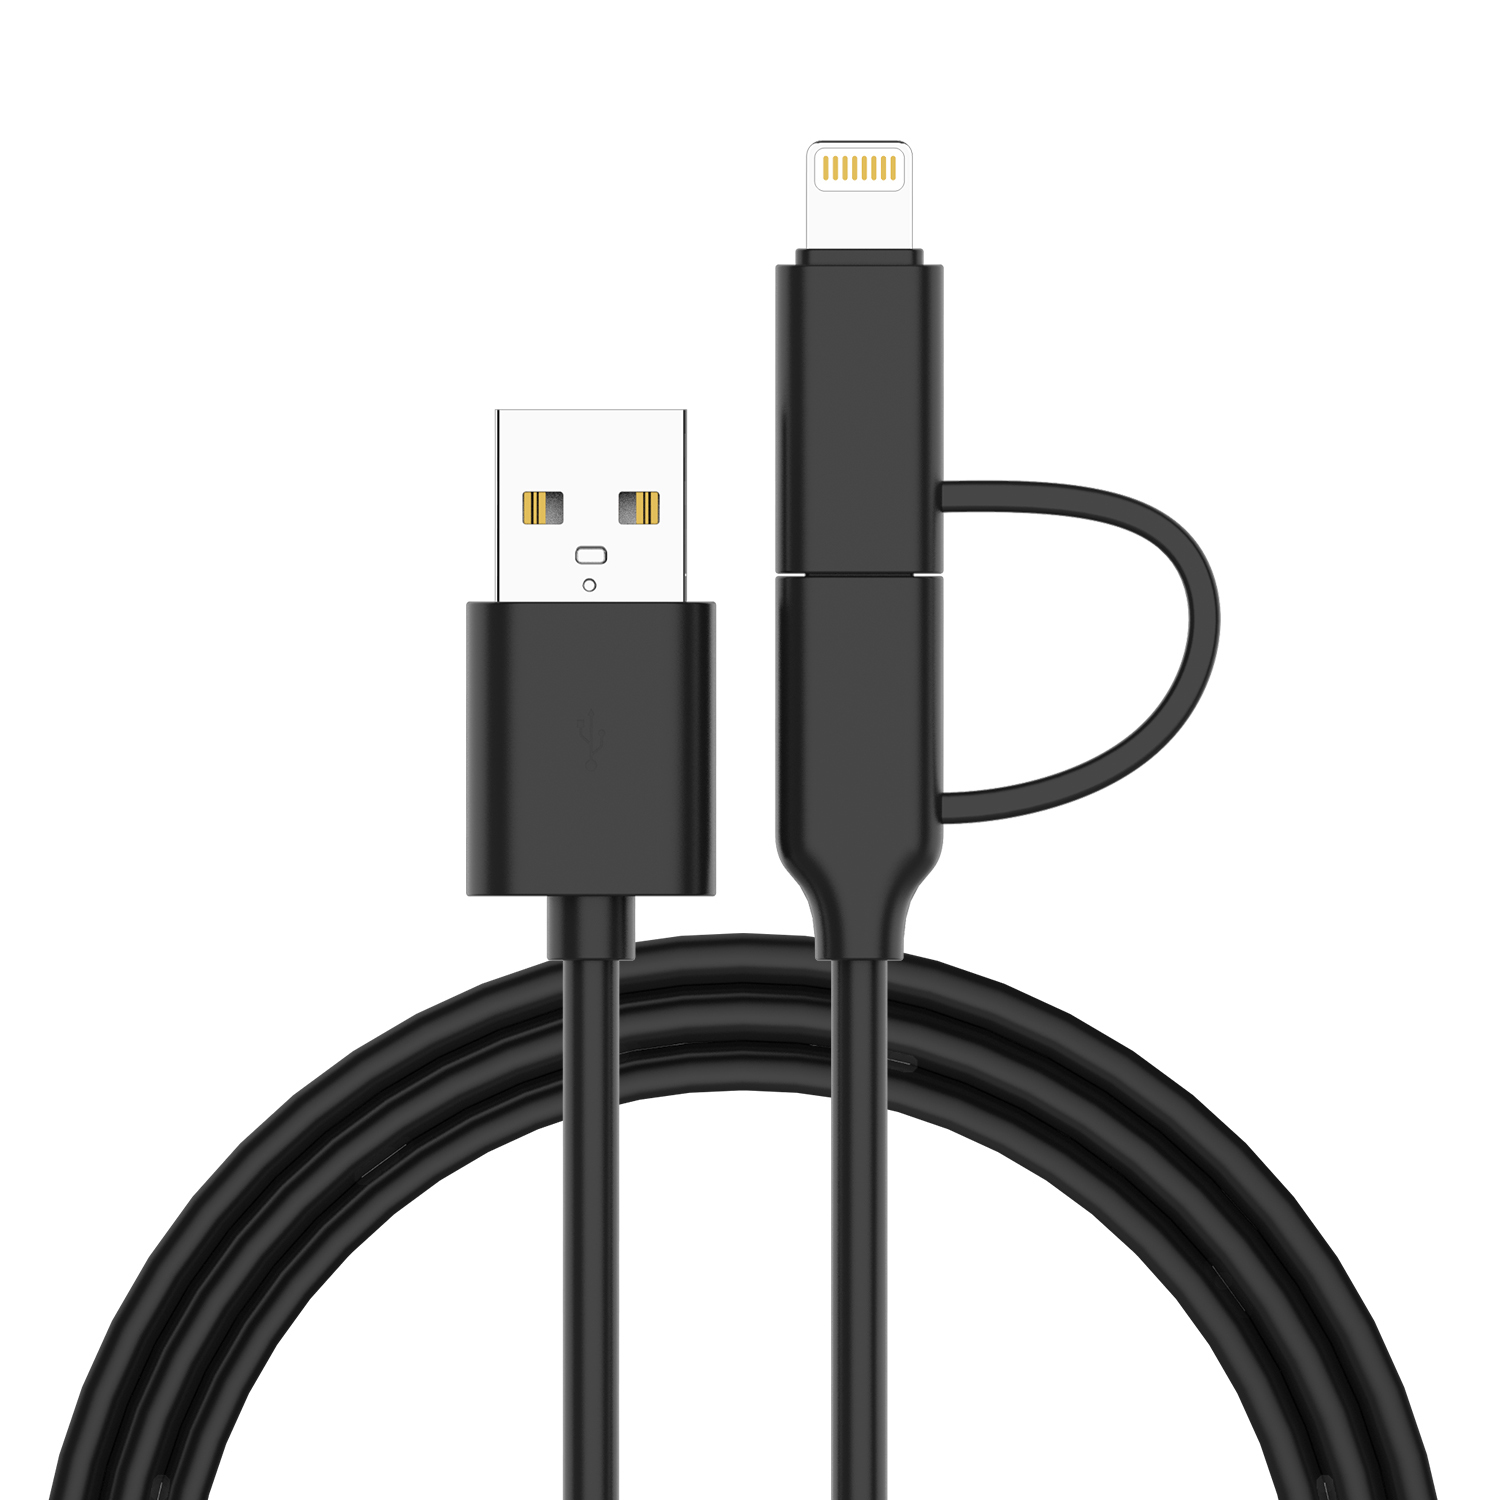 PD 60W Fast Charging Braided 3 in 1 USB Cable 